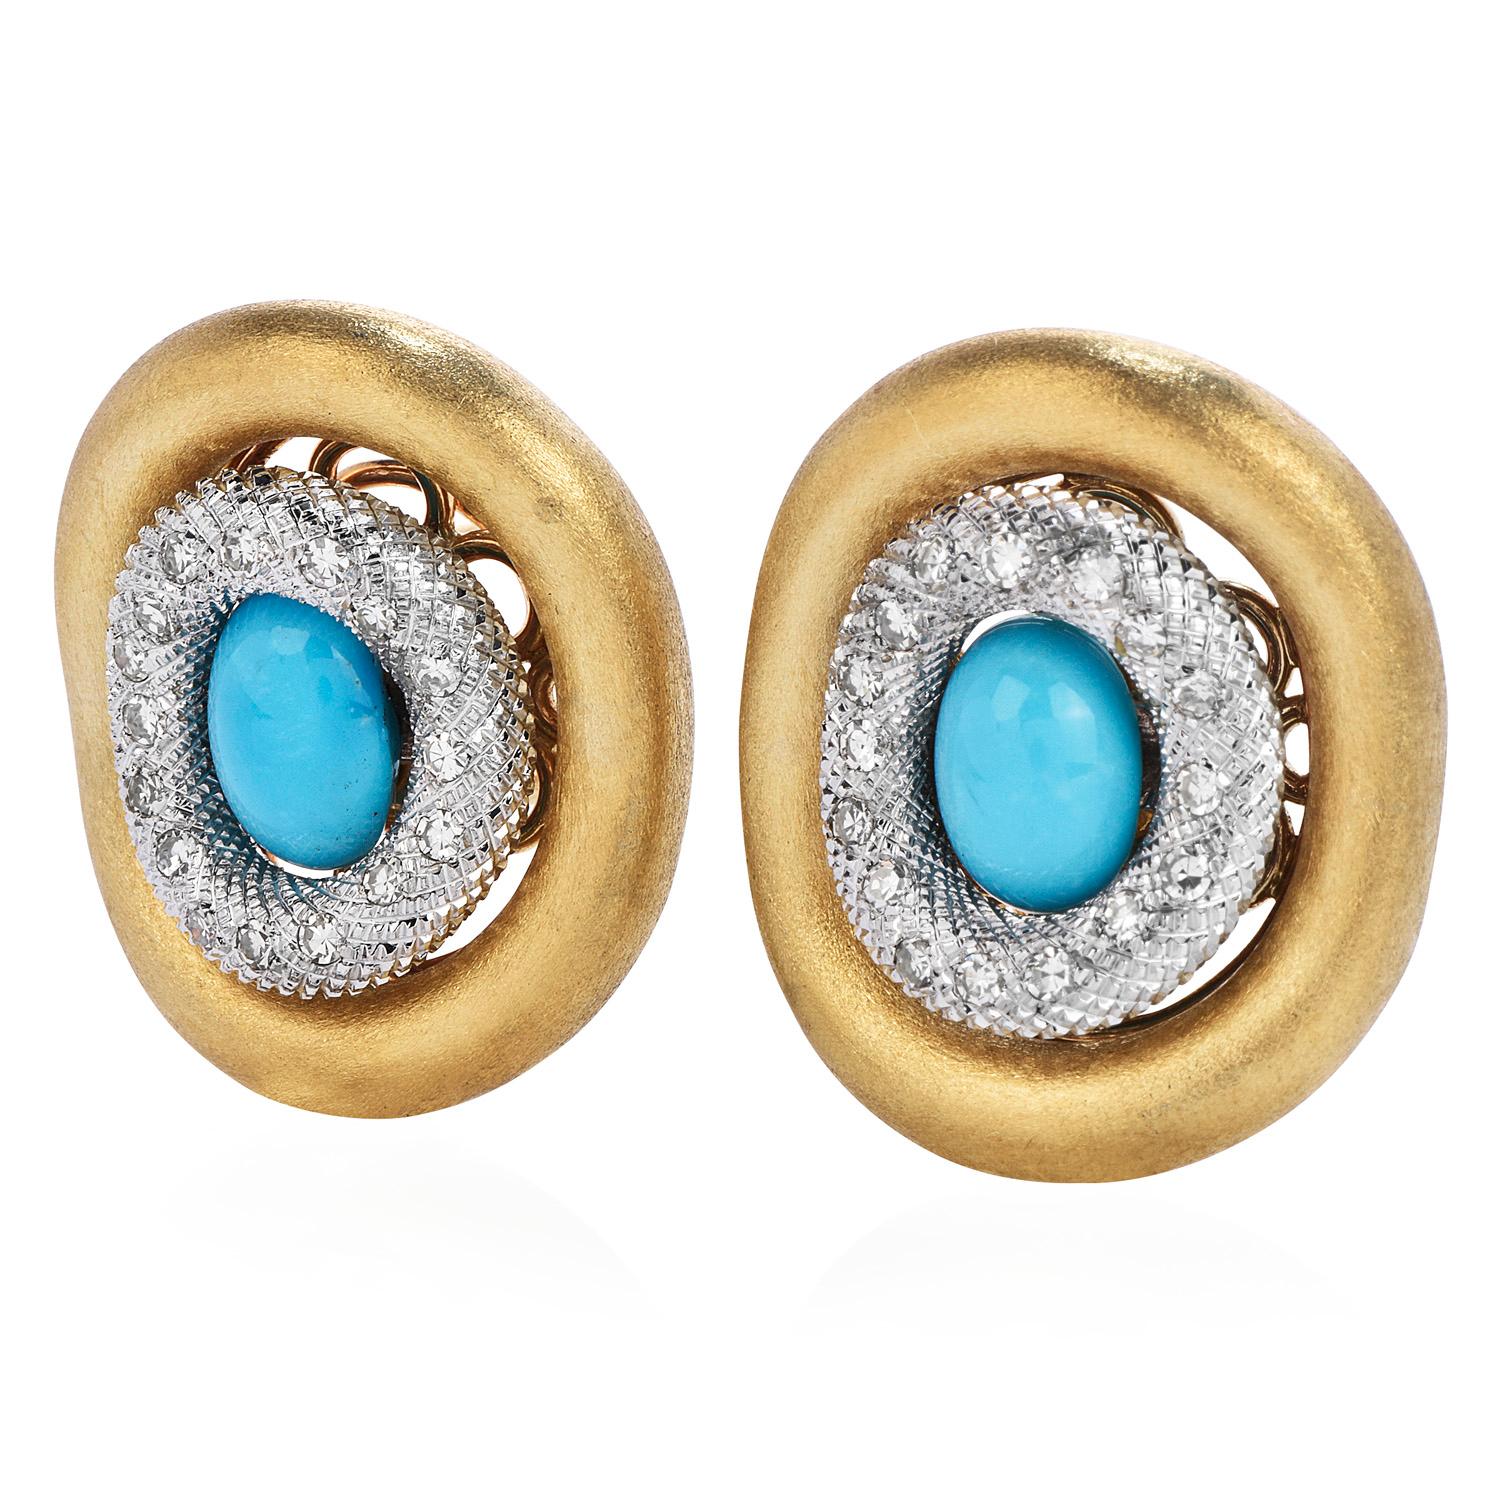 Dazzle yourself with these chic 1970's diamond turquoise vintage earrings.

Turquoise & Diamond Earrings bring the soft blue of the ocean to your ensemble with an approximate total weight of 36.0 grams, 

Crafted in heavy solid 18K yellow and white